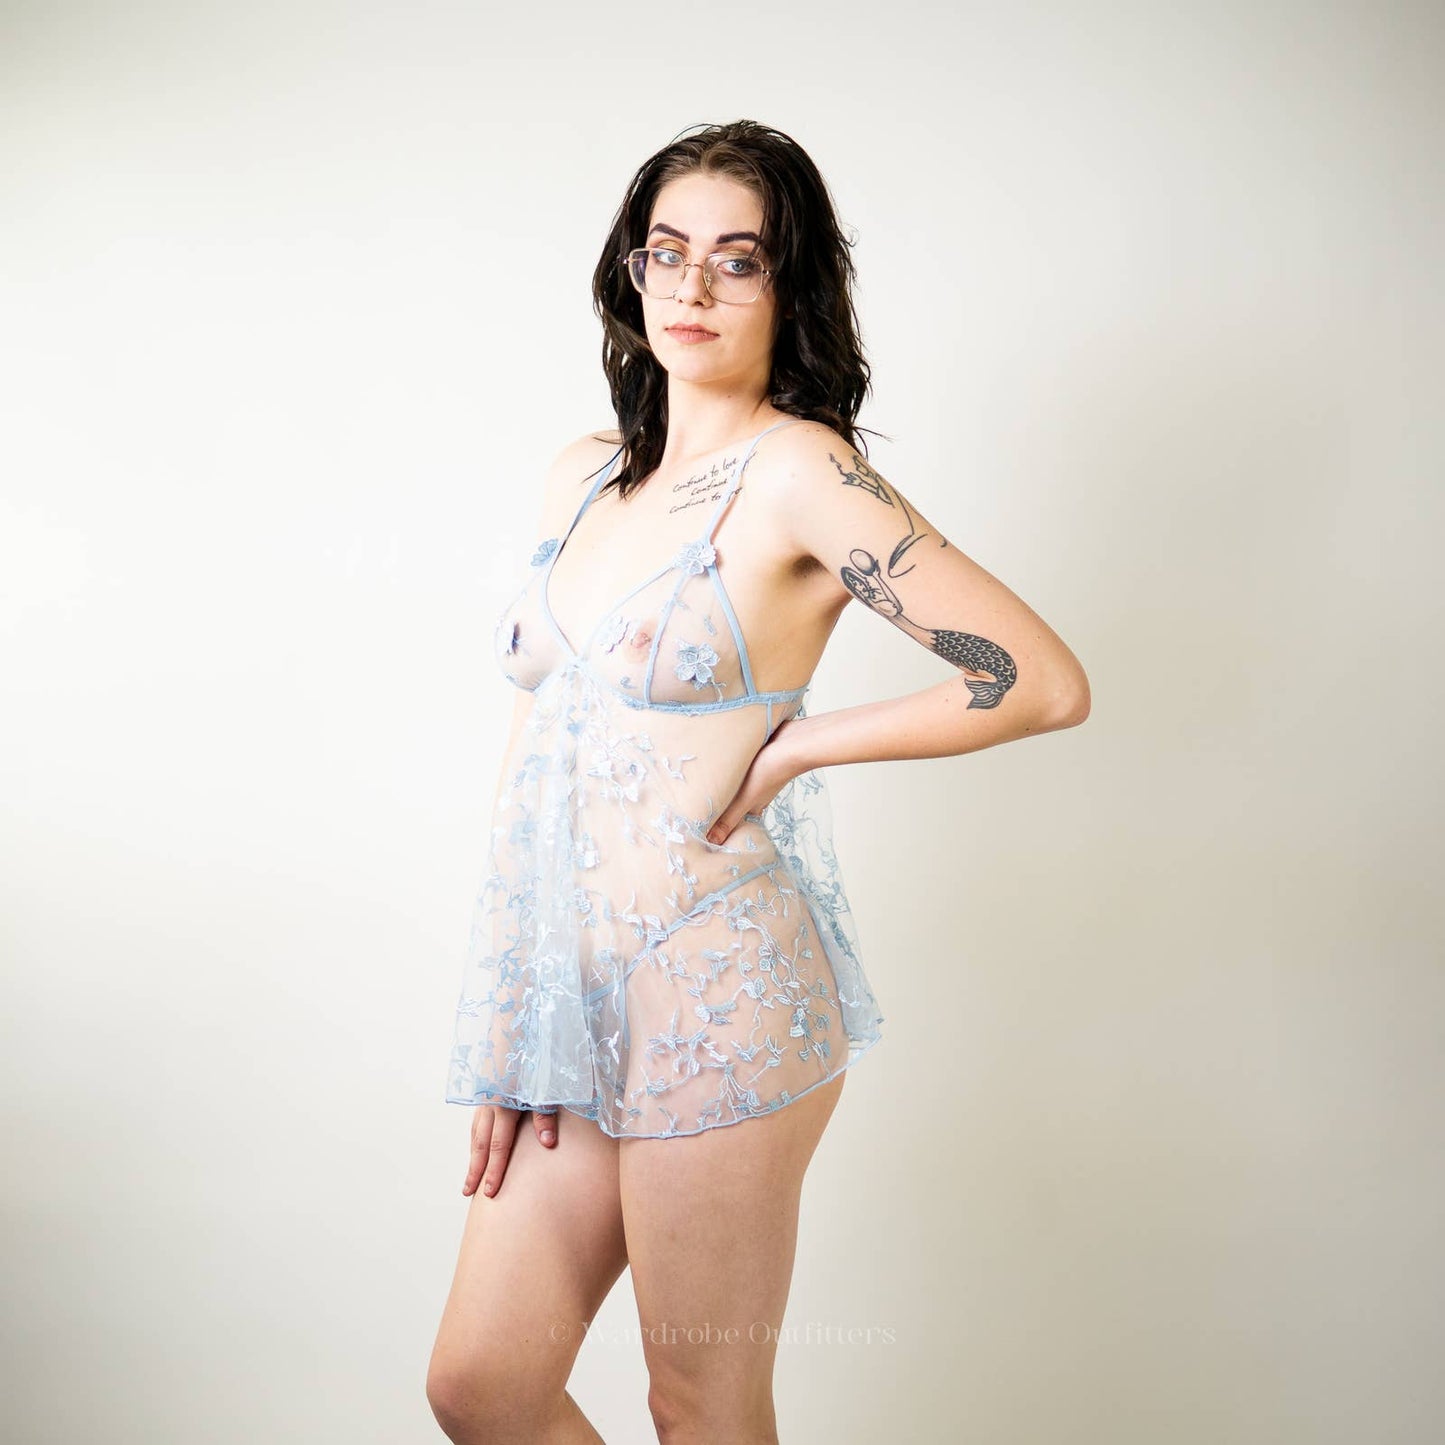 Baby Blue Floral Lace Mesh Slip with Thong Lingerie